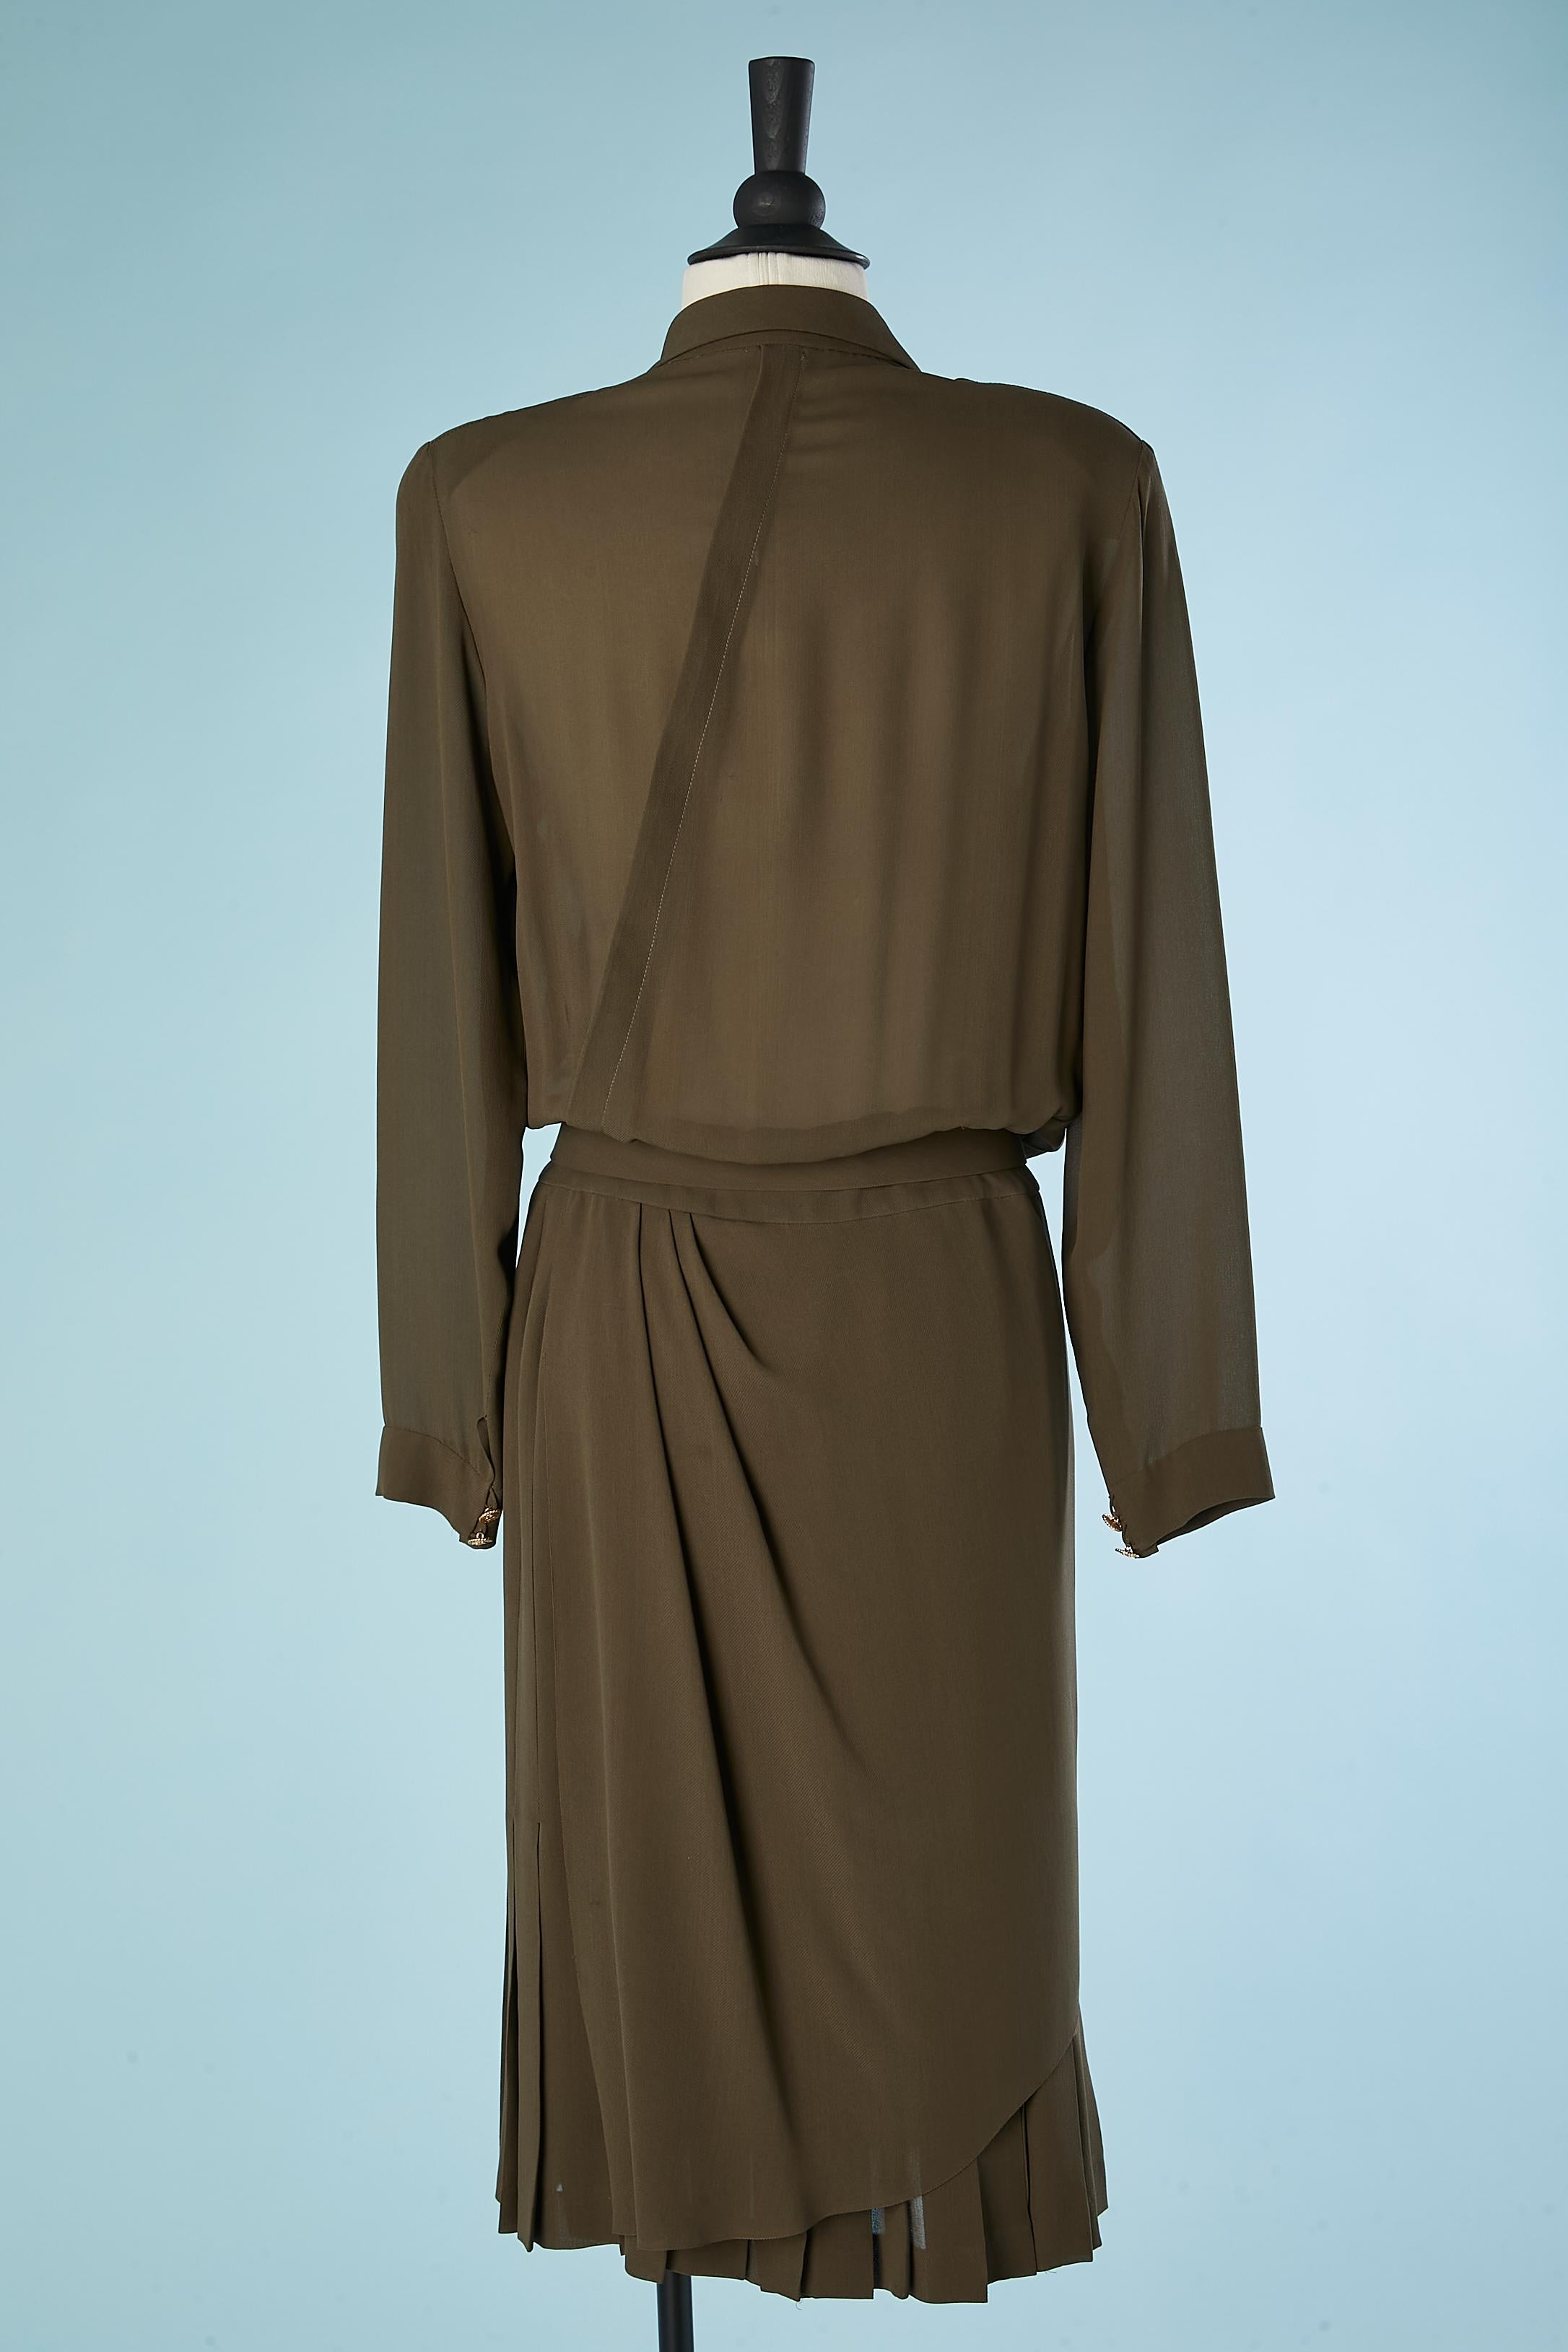 Silk chiffon kaki cocktail dress wrapped and pleated with belt Chanel  For Sale 1